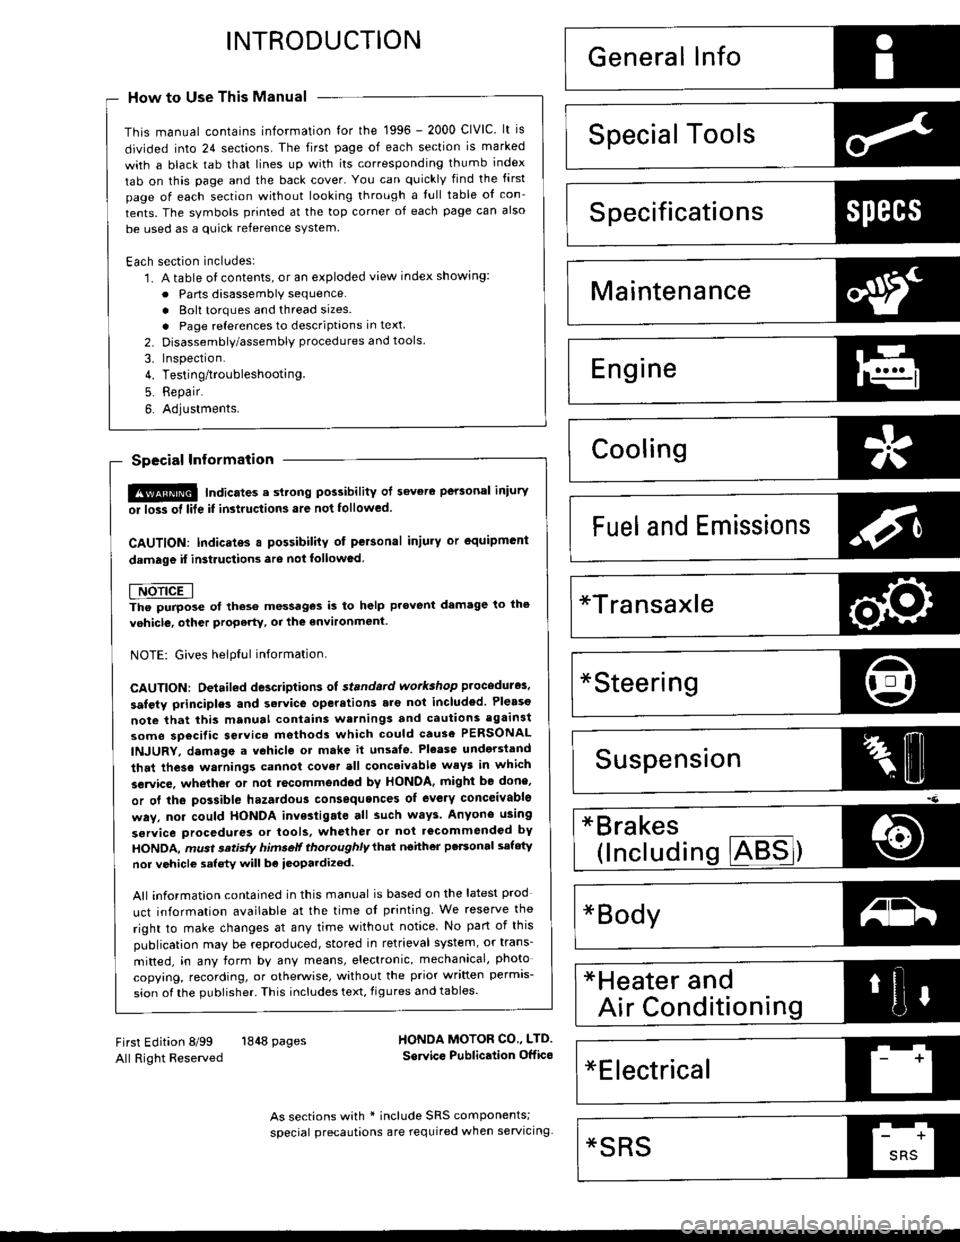 HONDA CIVIC 1998 6.G Workshop Manual INTRODUCTION
How to Use This Manual
This manual contains information for the 1996 - 2000 ClVlC. lt is
divided into 24 sections. The first page of each section is marked
with a black tab that lines up 